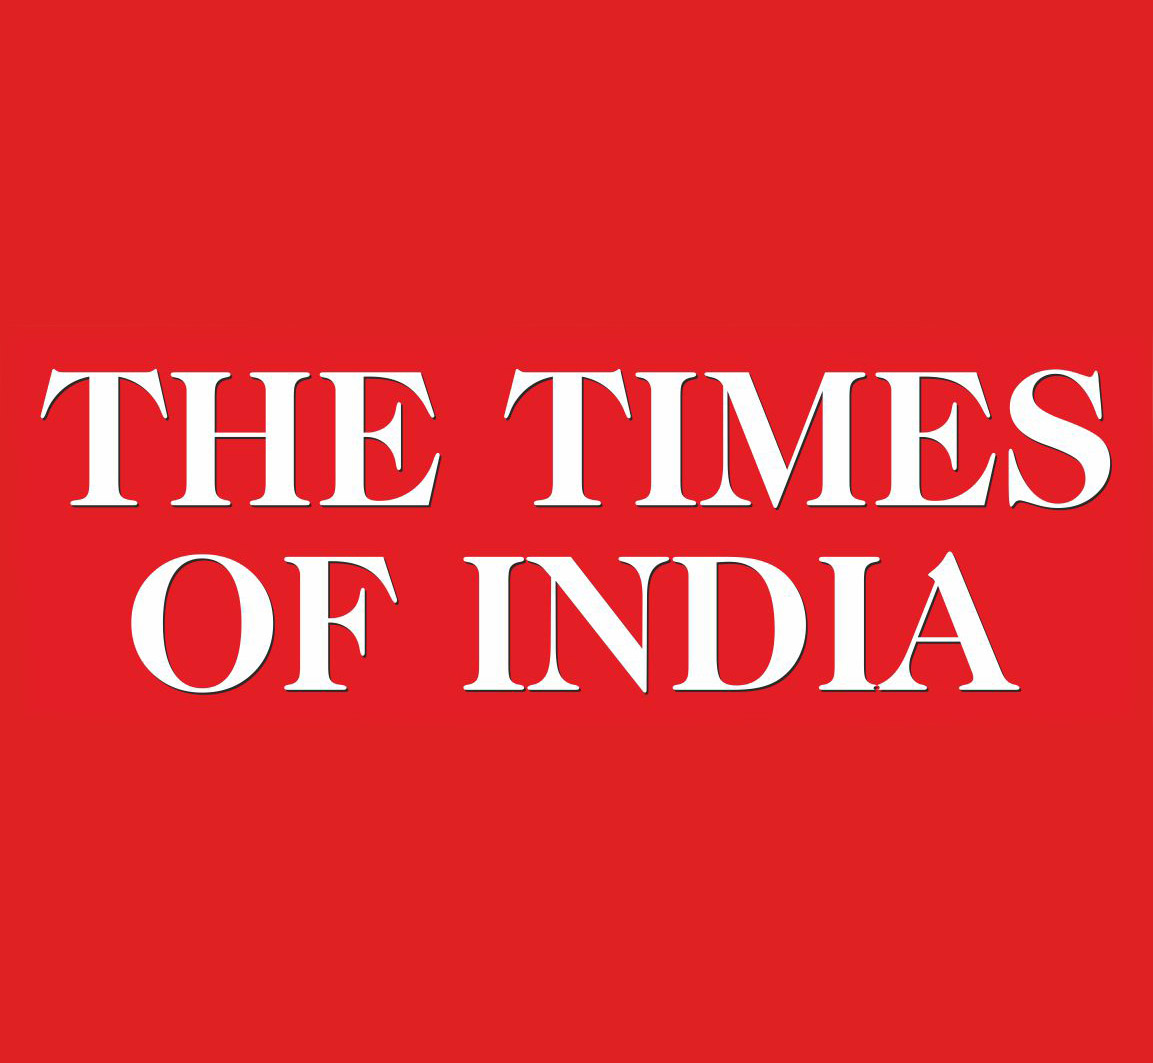 Times of India: Model proposed for solving problems through global human unification